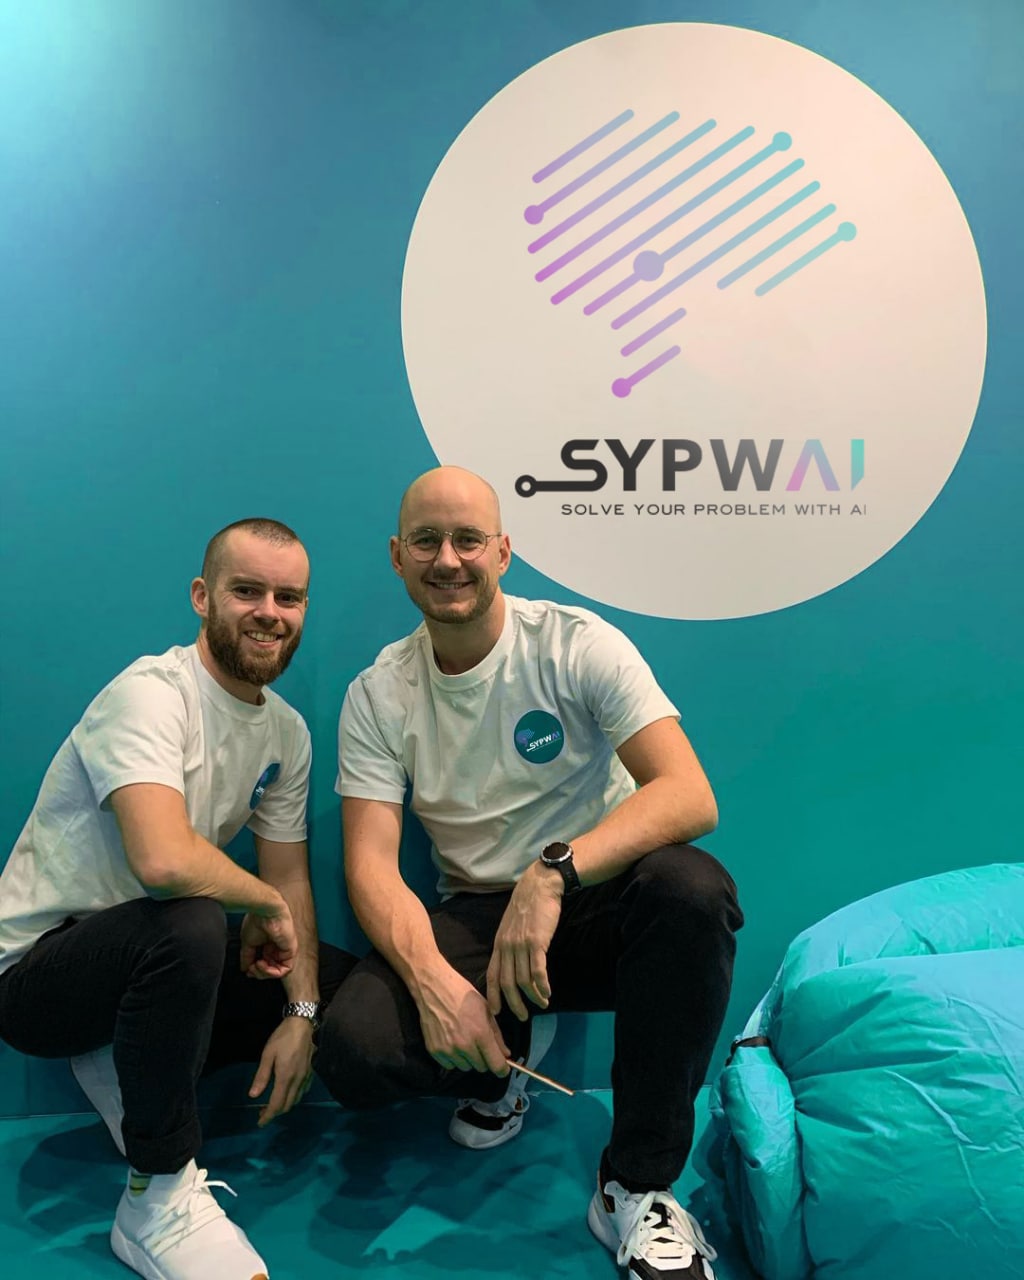 Need More Inspiration With Sypwai? Read this!